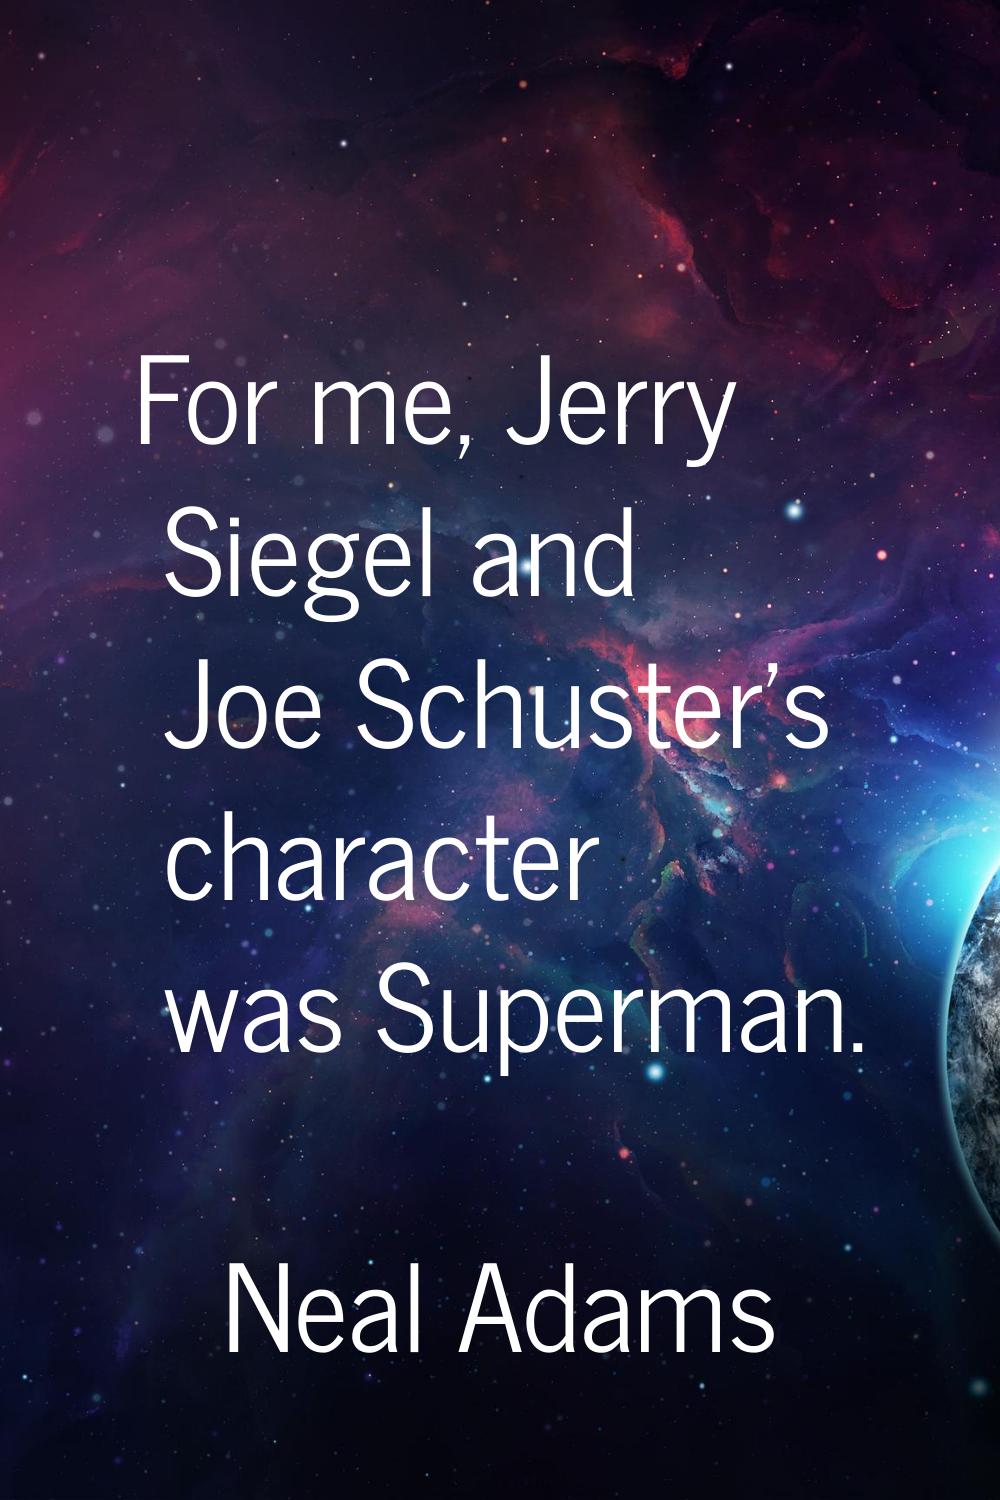 For me, Jerry Siegel and Joe Schuster's character was Superman.